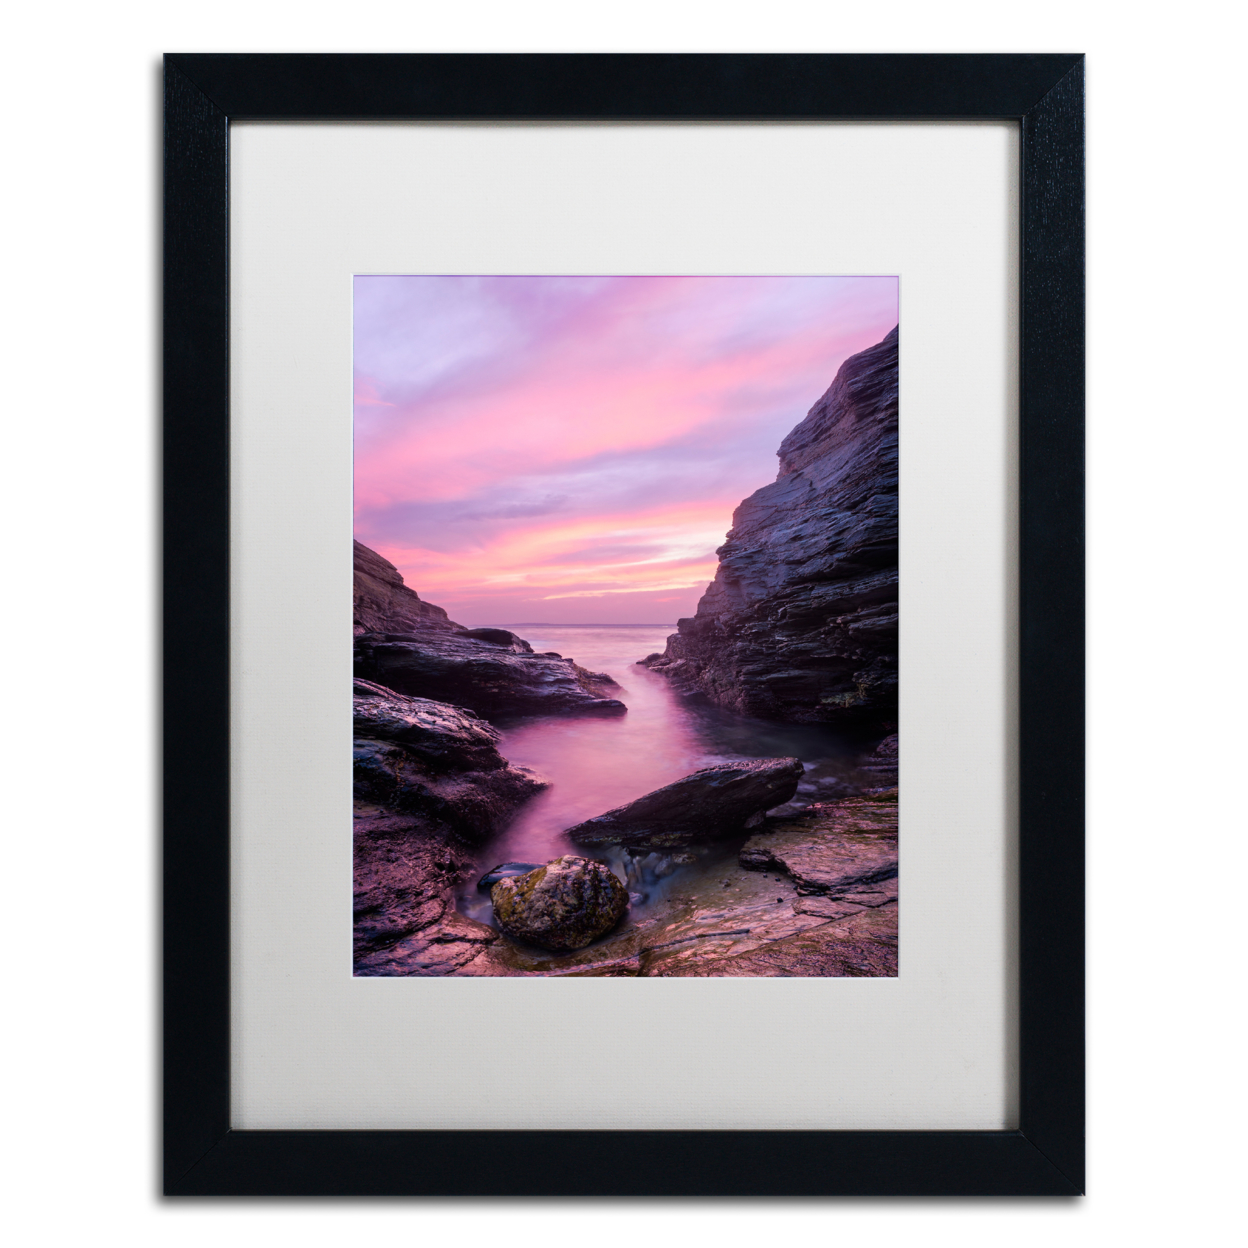 Michael Blanchette Photography 'Rosy Inlet' Black Wooden Framed Art 18 X 22 Inches